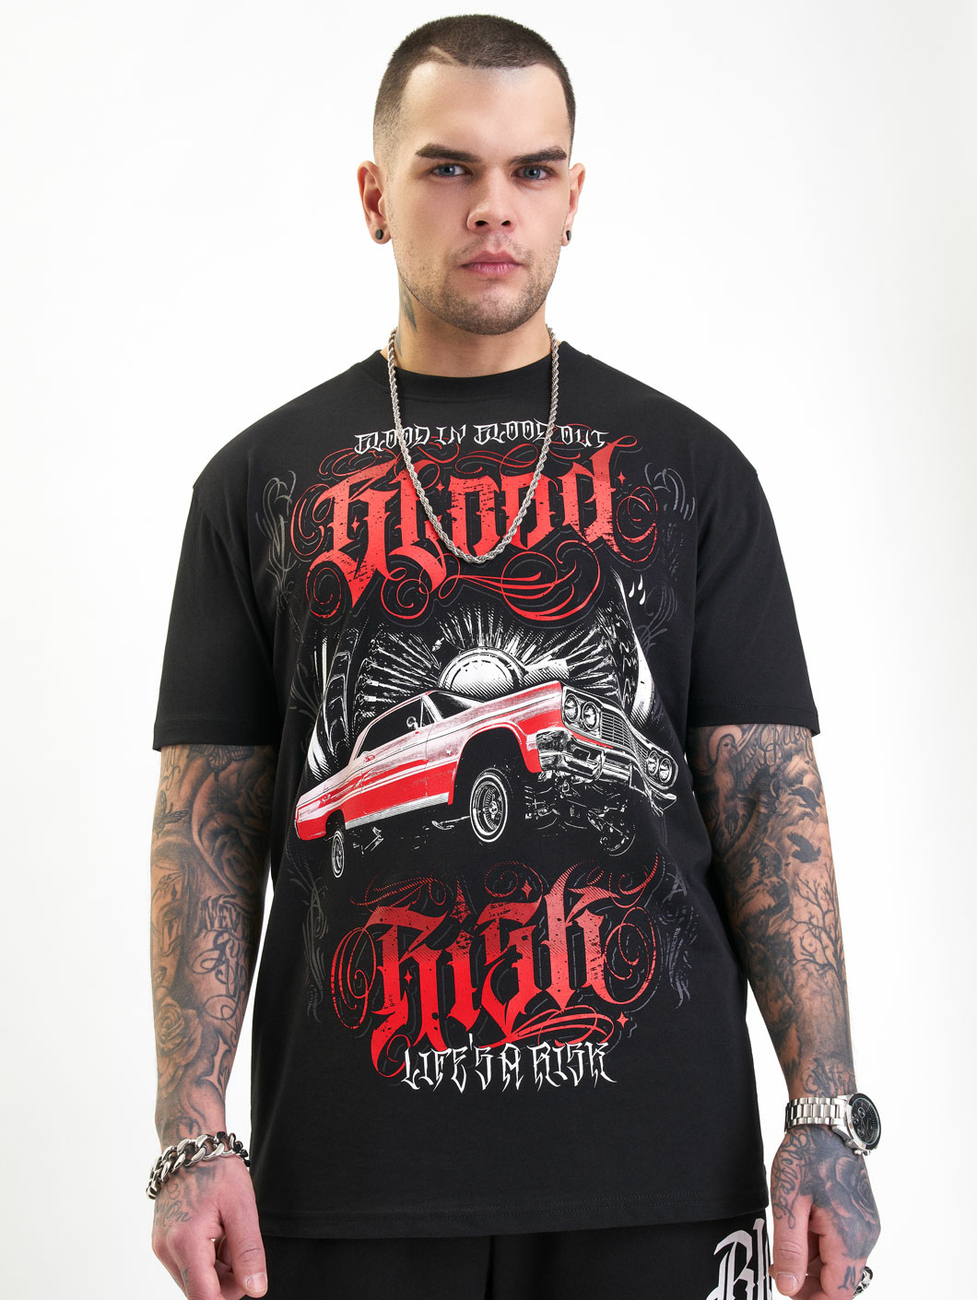 Blood In Blood Out Tavos T-Shirt M